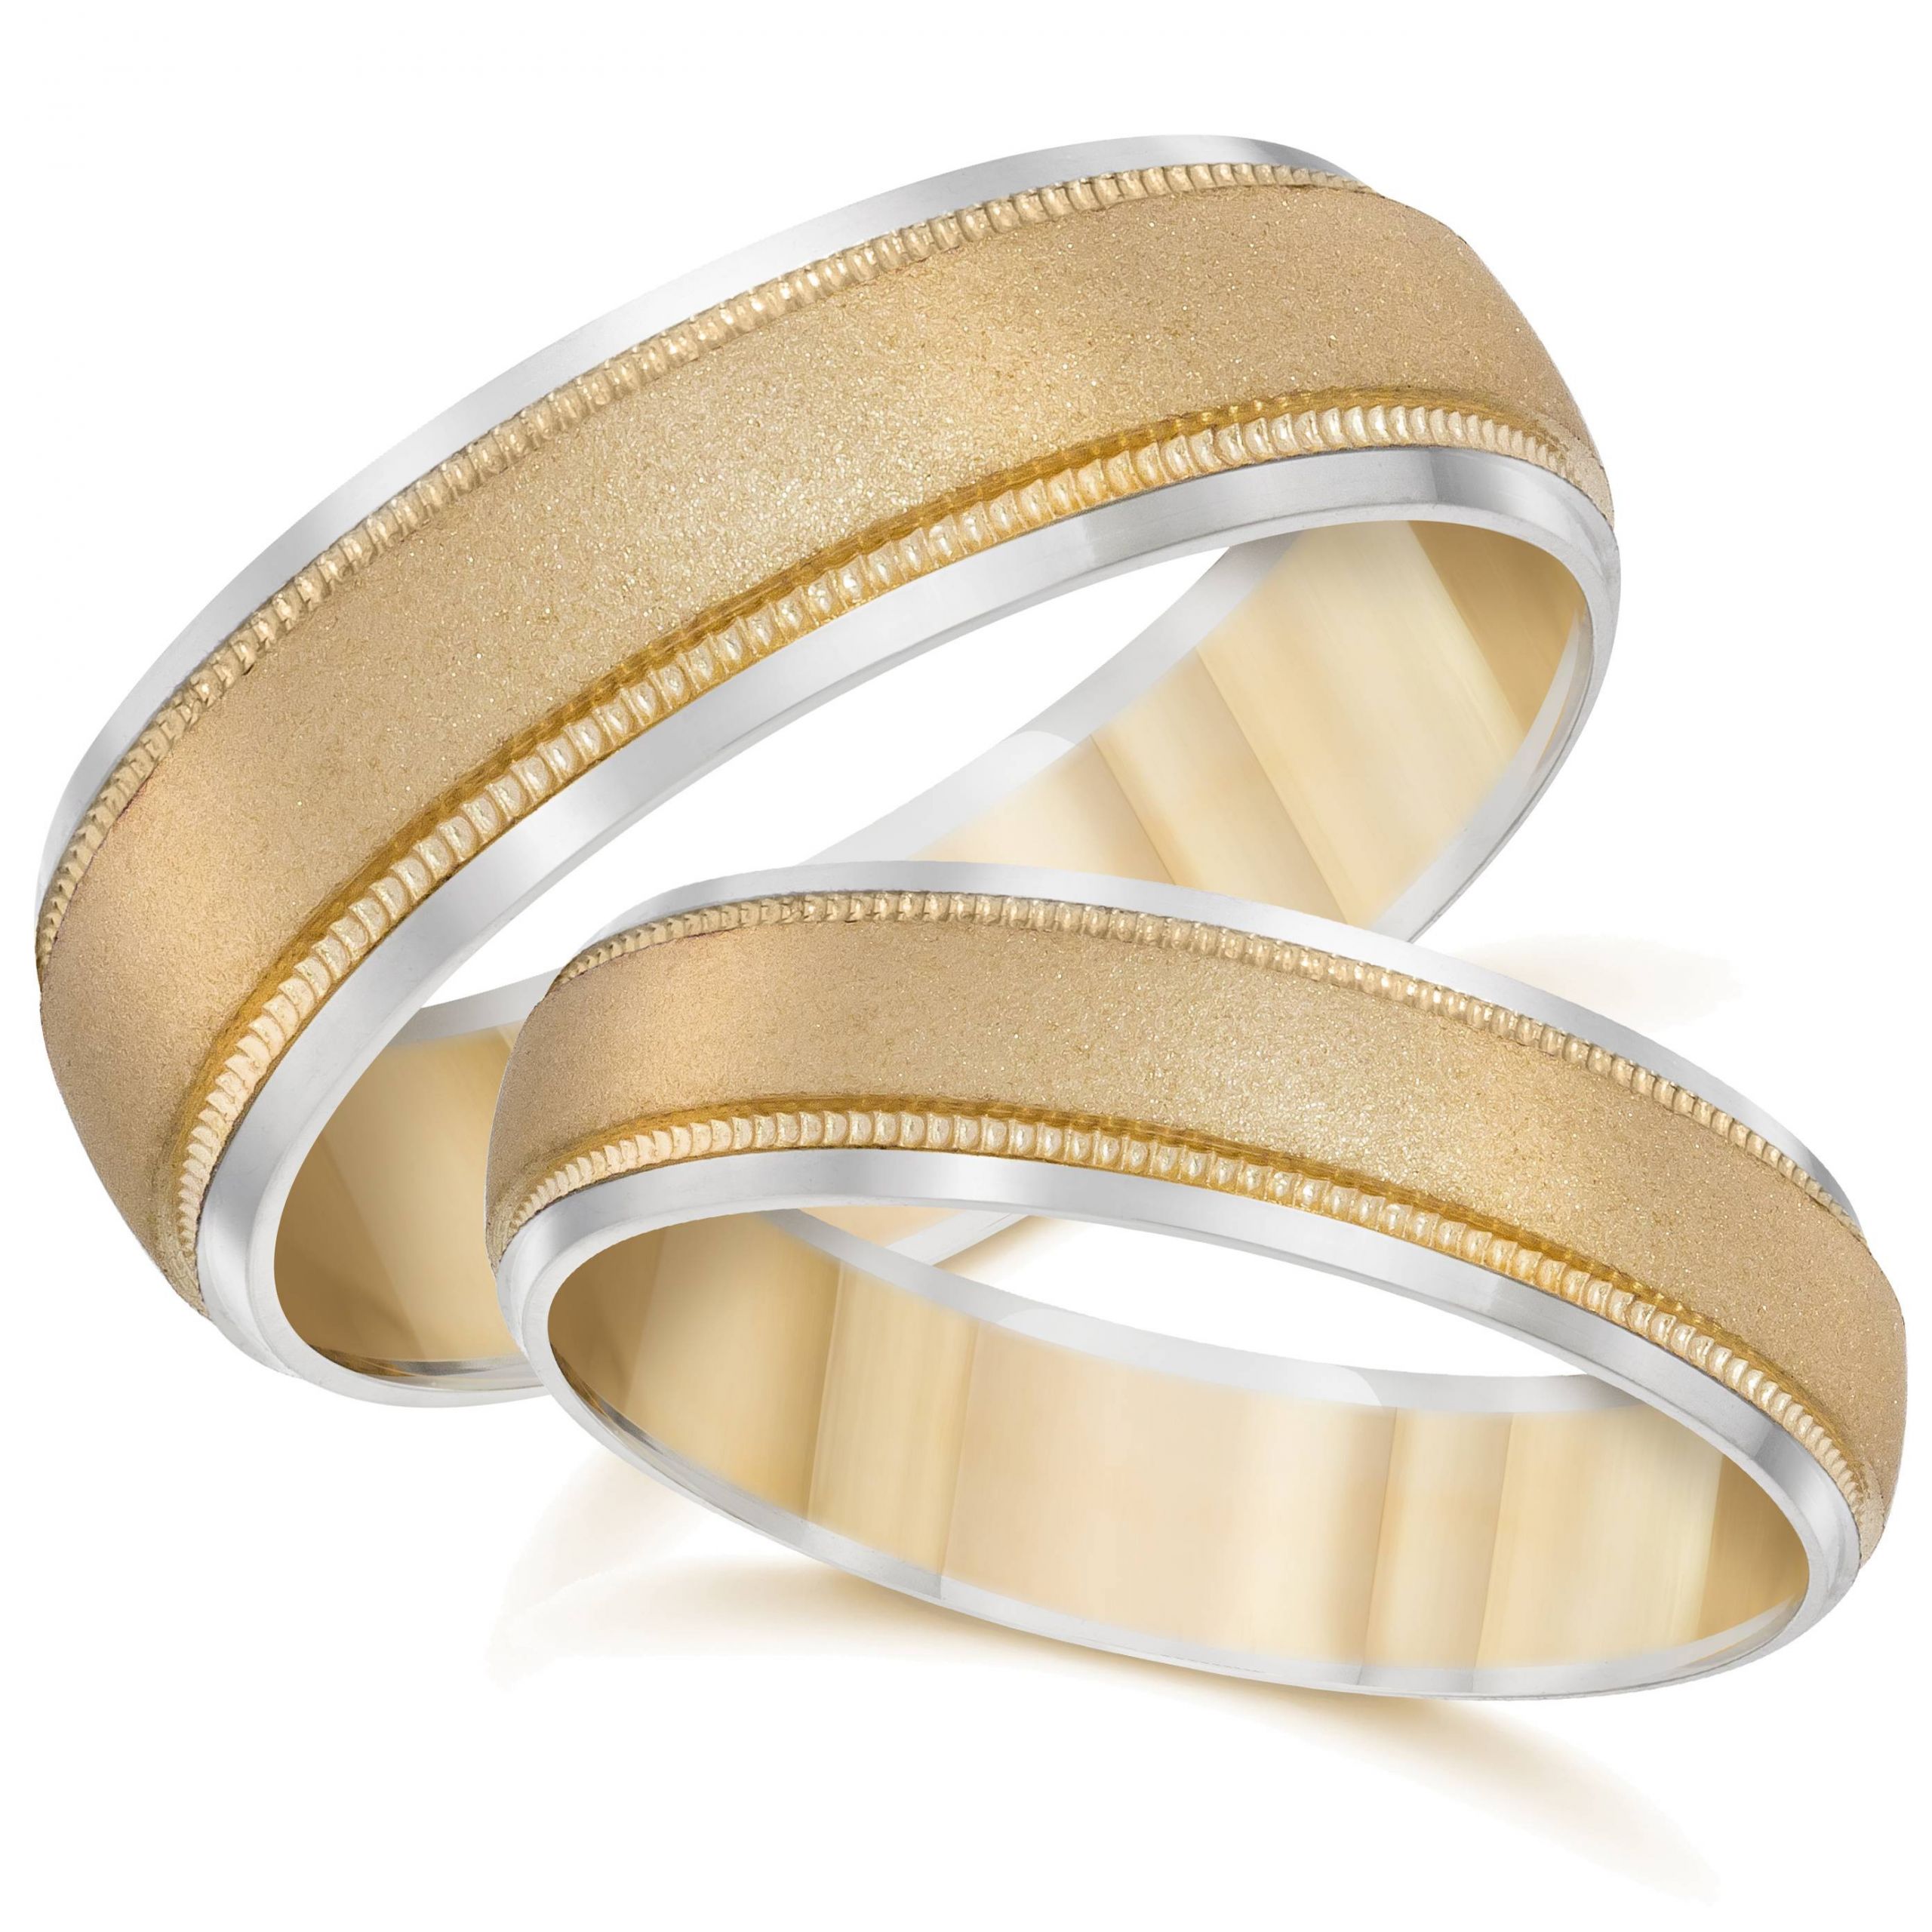 Two Tone Wedding Ring Sets
 Gold Matching His Hers Two Tone Wedding Band Ring Set